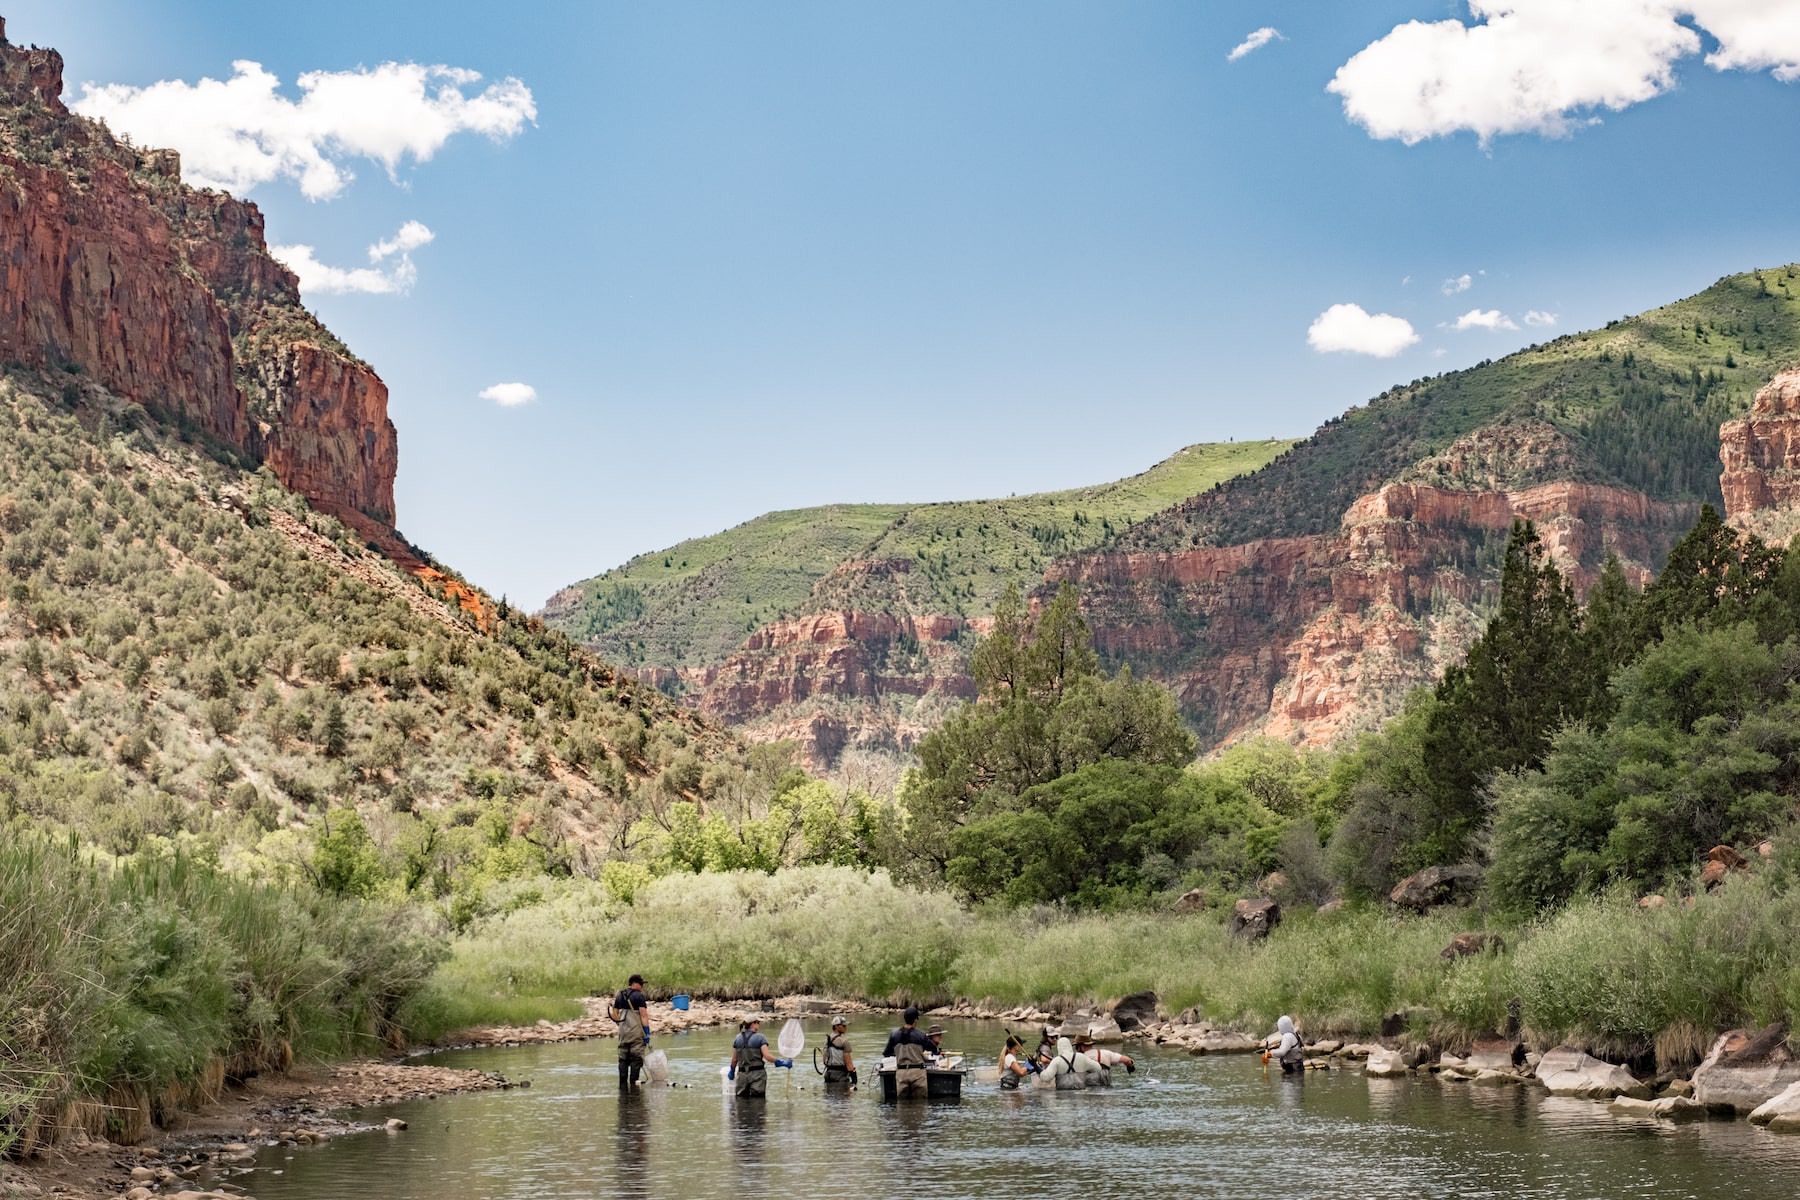 the DRAMS team wades in a canyon river with nets and gear, surrounded by green trees and vegetation and red cliffs.